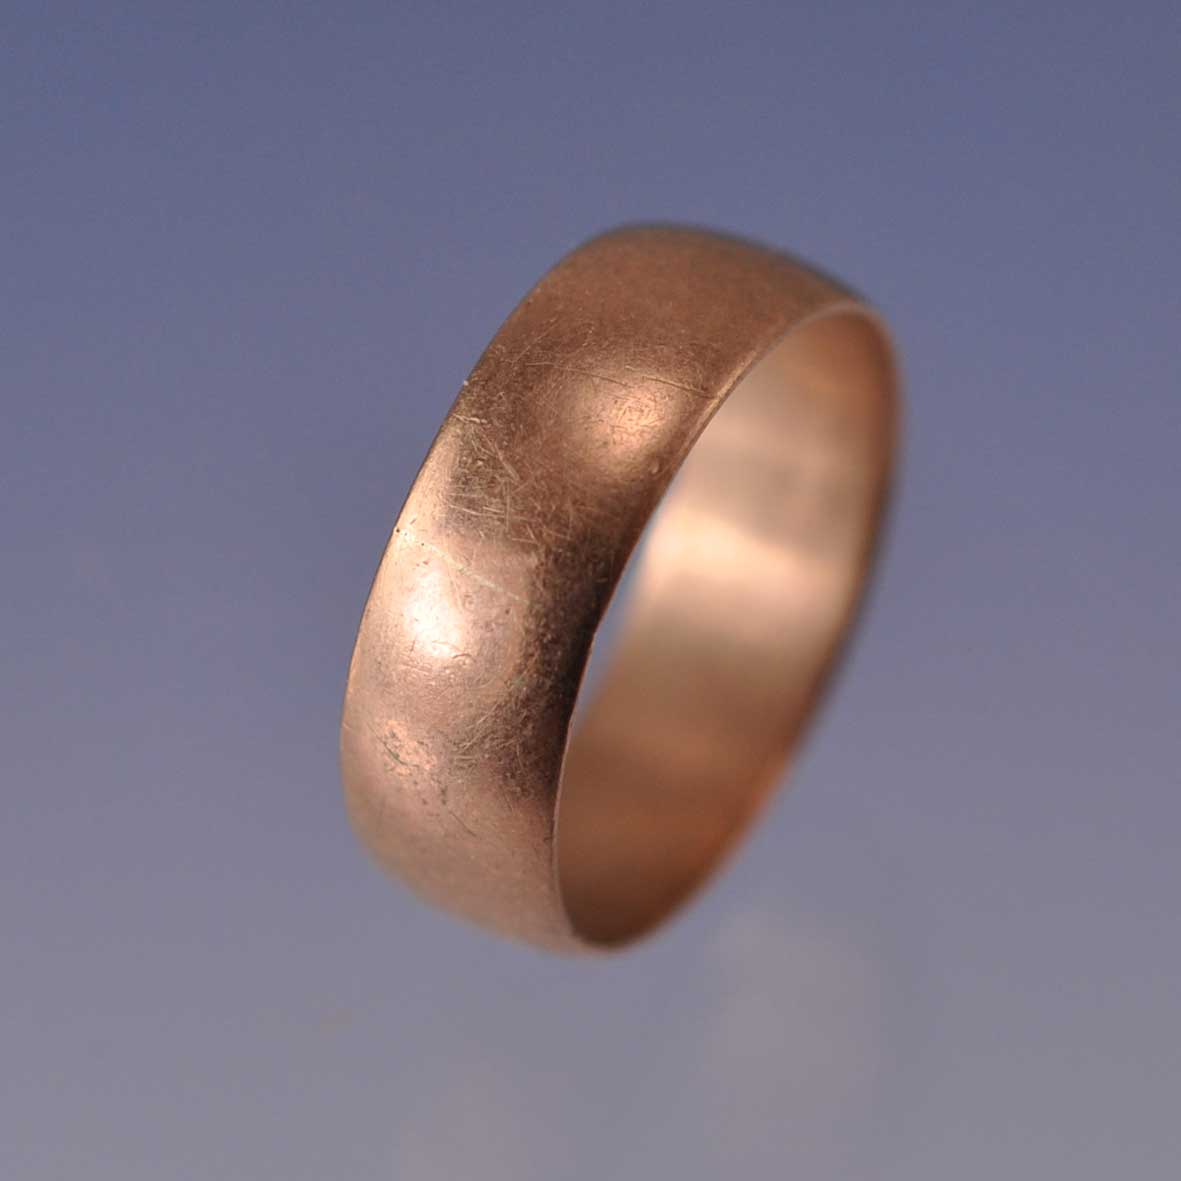 Re-style your own wedding ring. Pendant by Chris Parry Jewellery